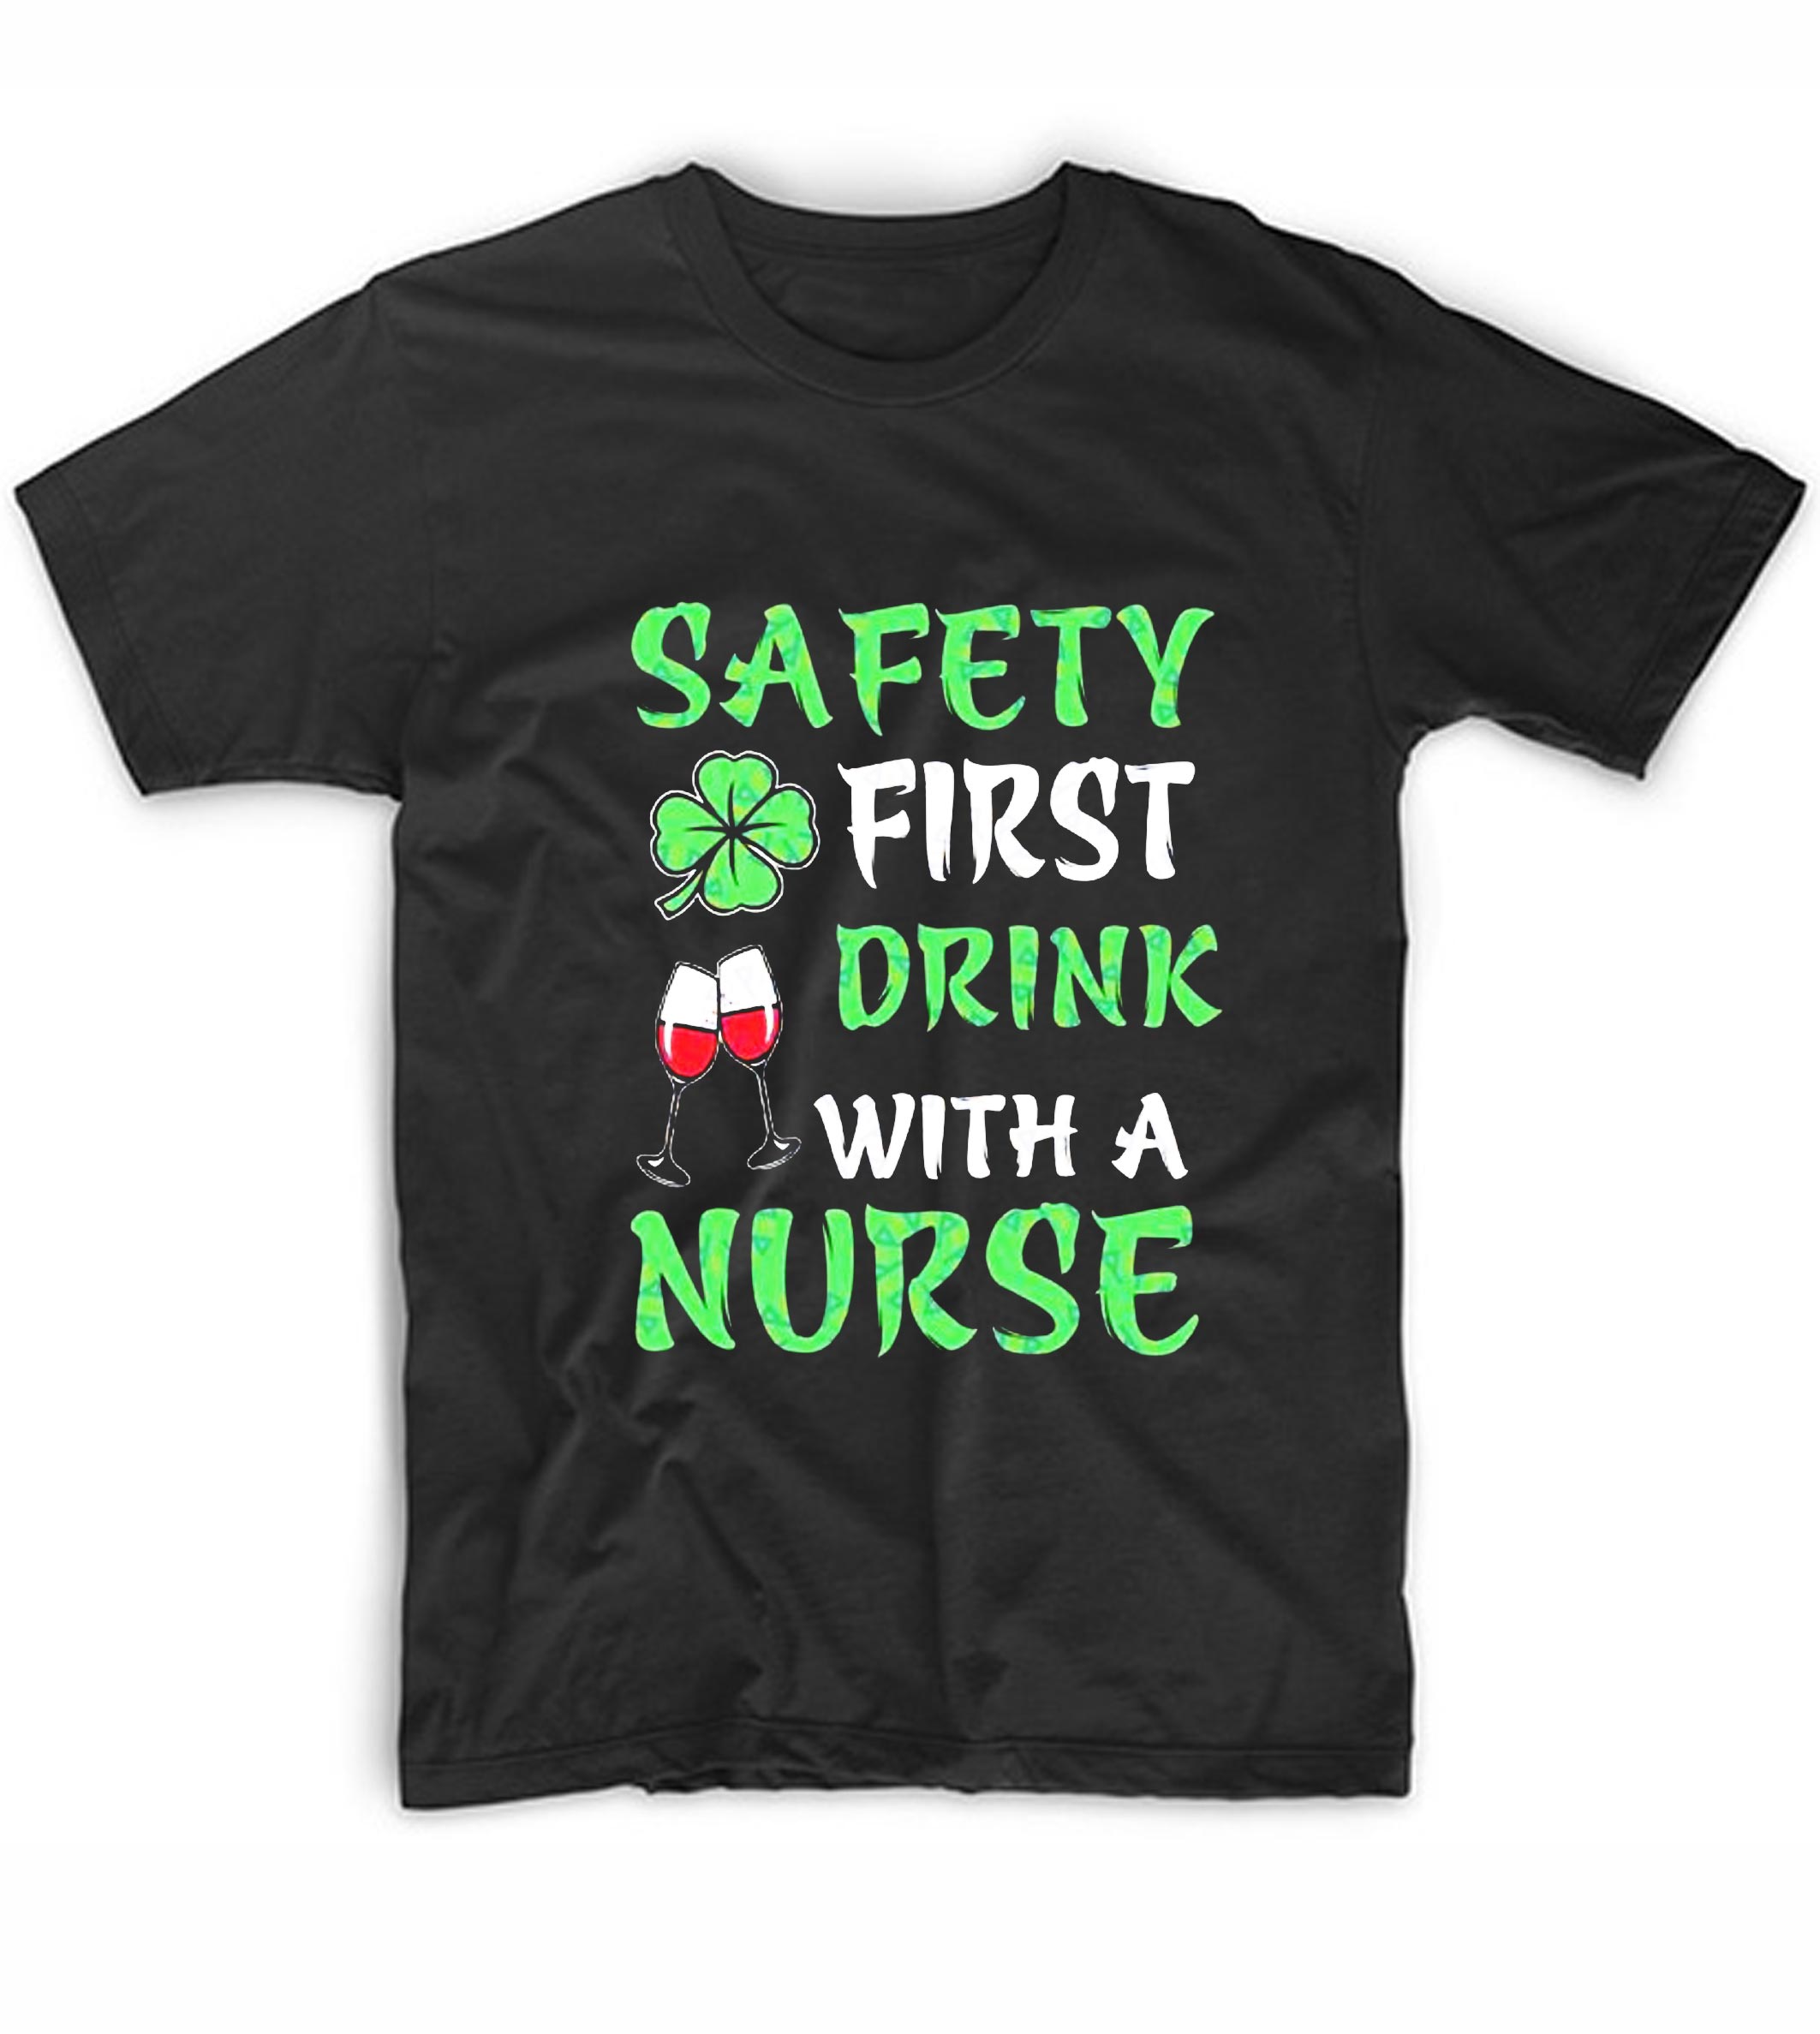 Safety First Drink With A Nurse Graphic Tees - t shirt store near me ...